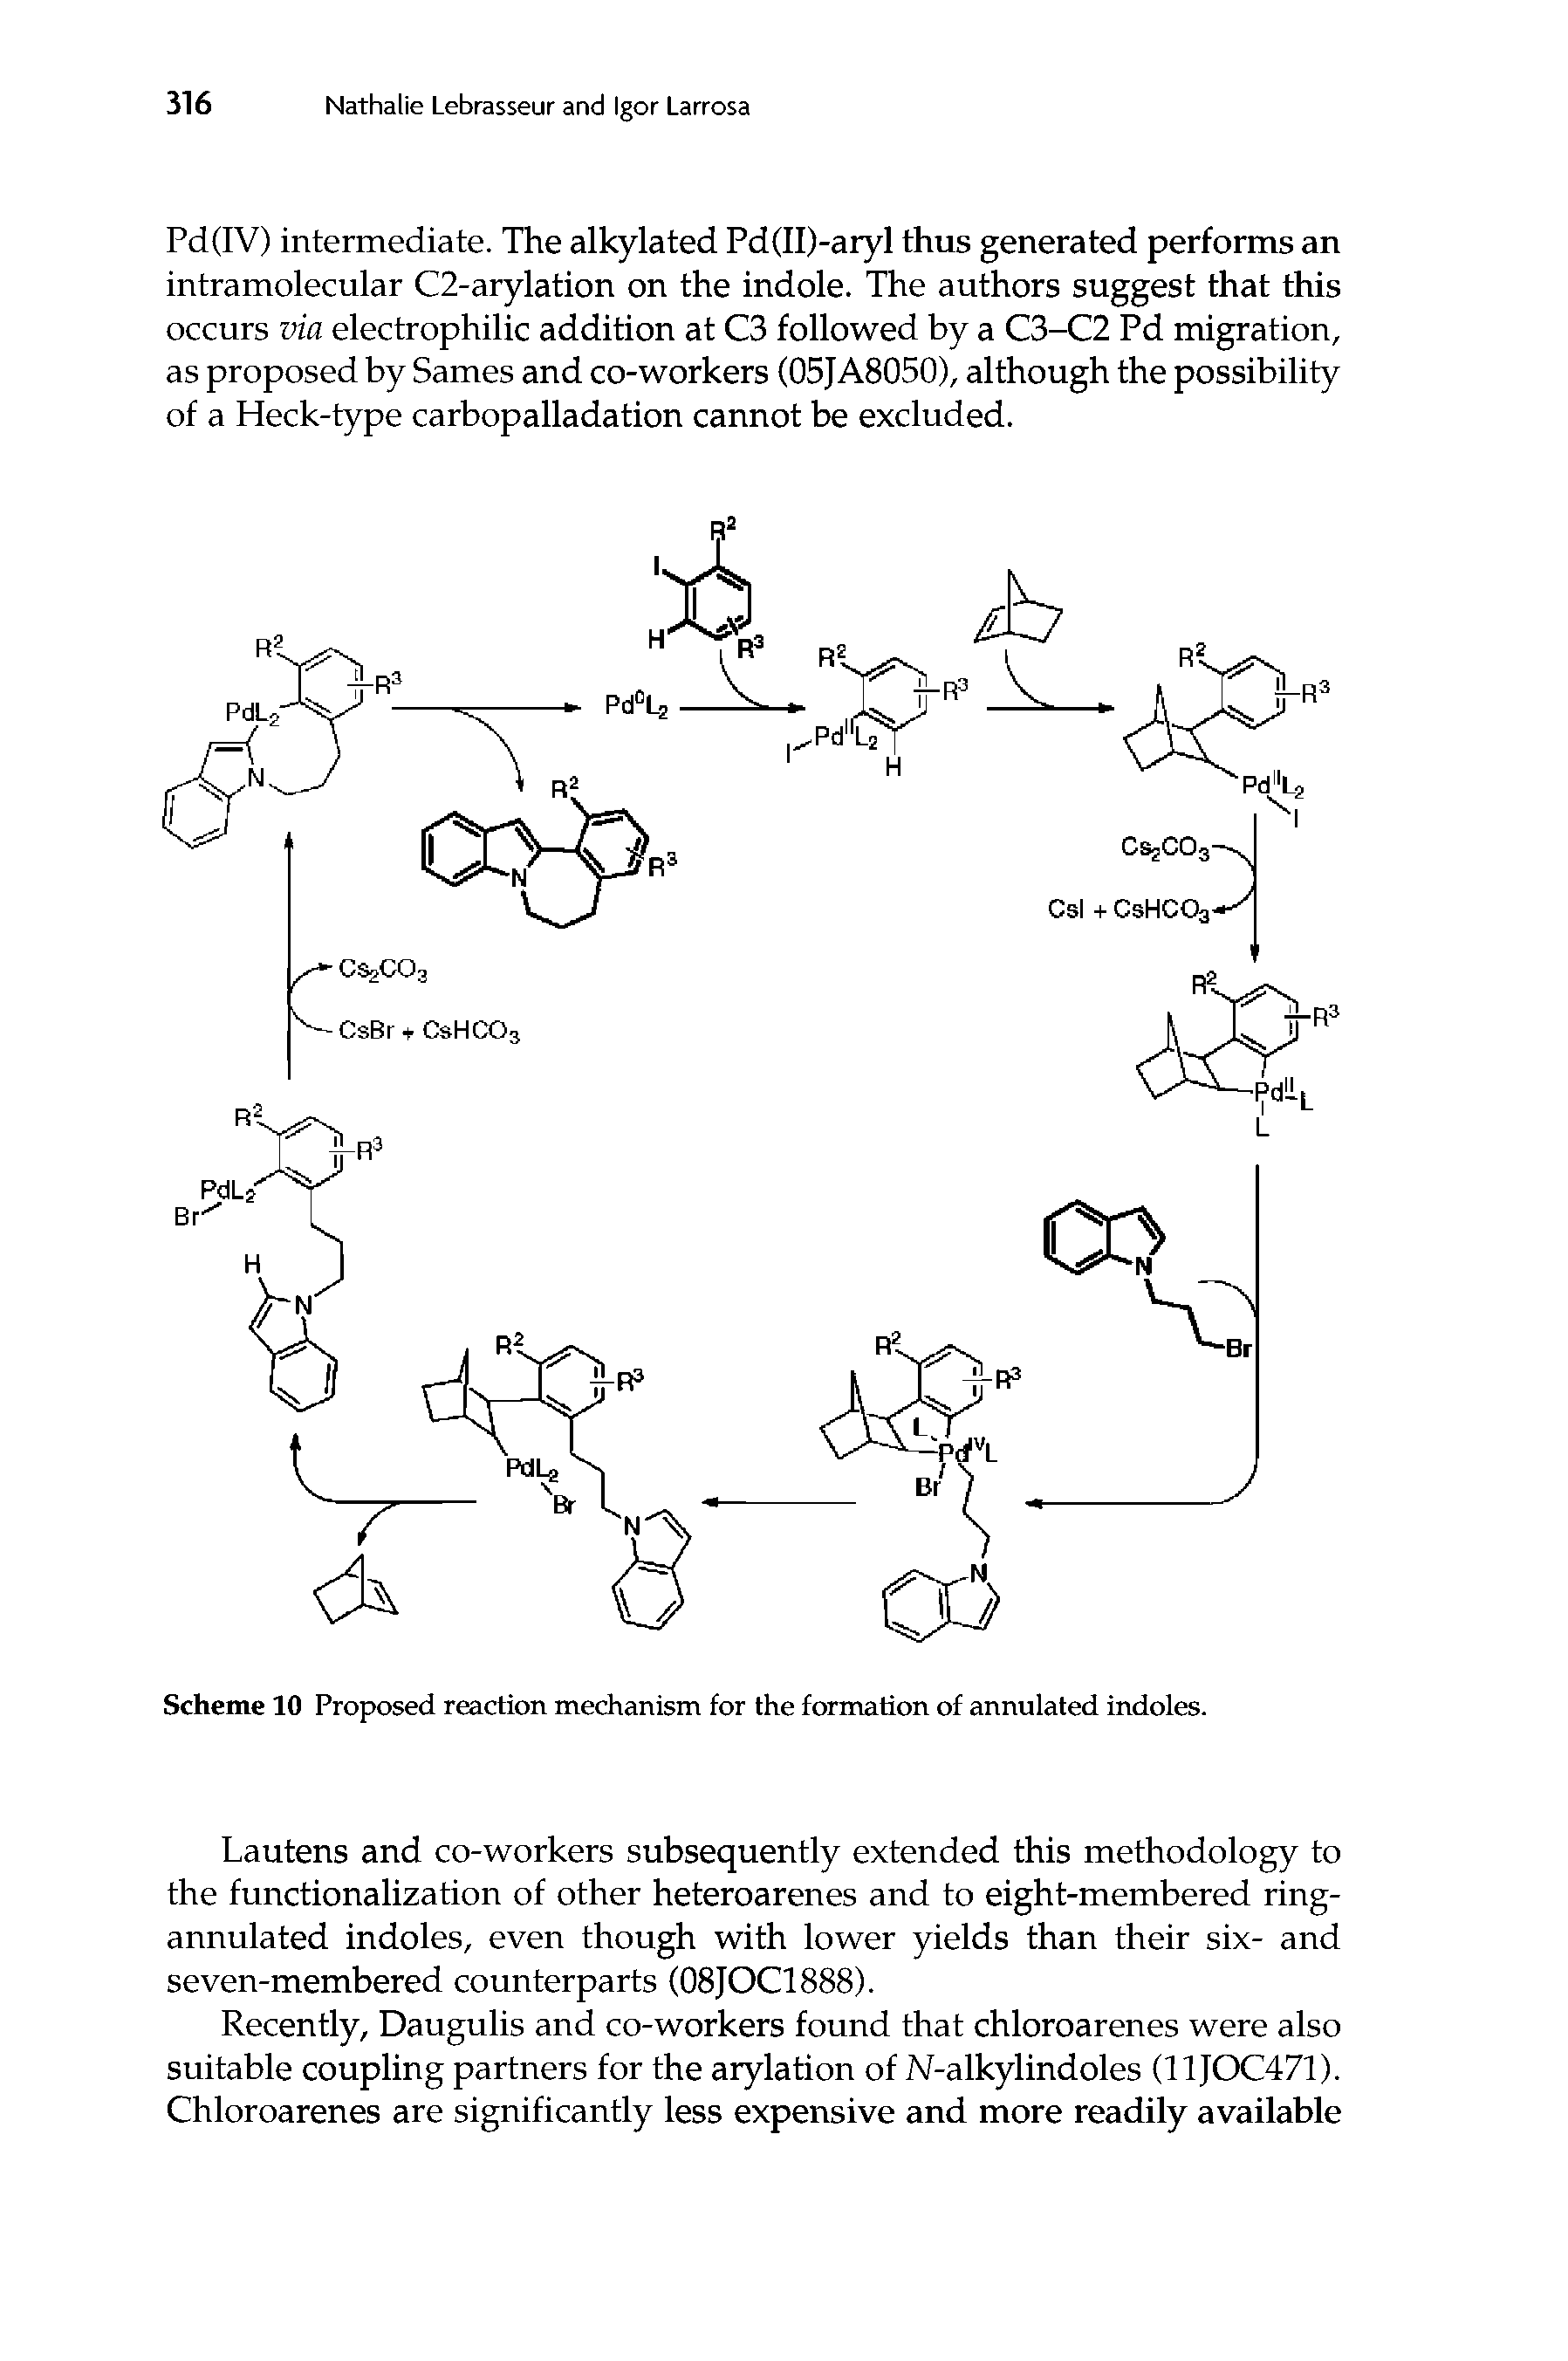 Scheme 10 Proposed reaction mechanism for the formation of annulated indoles.